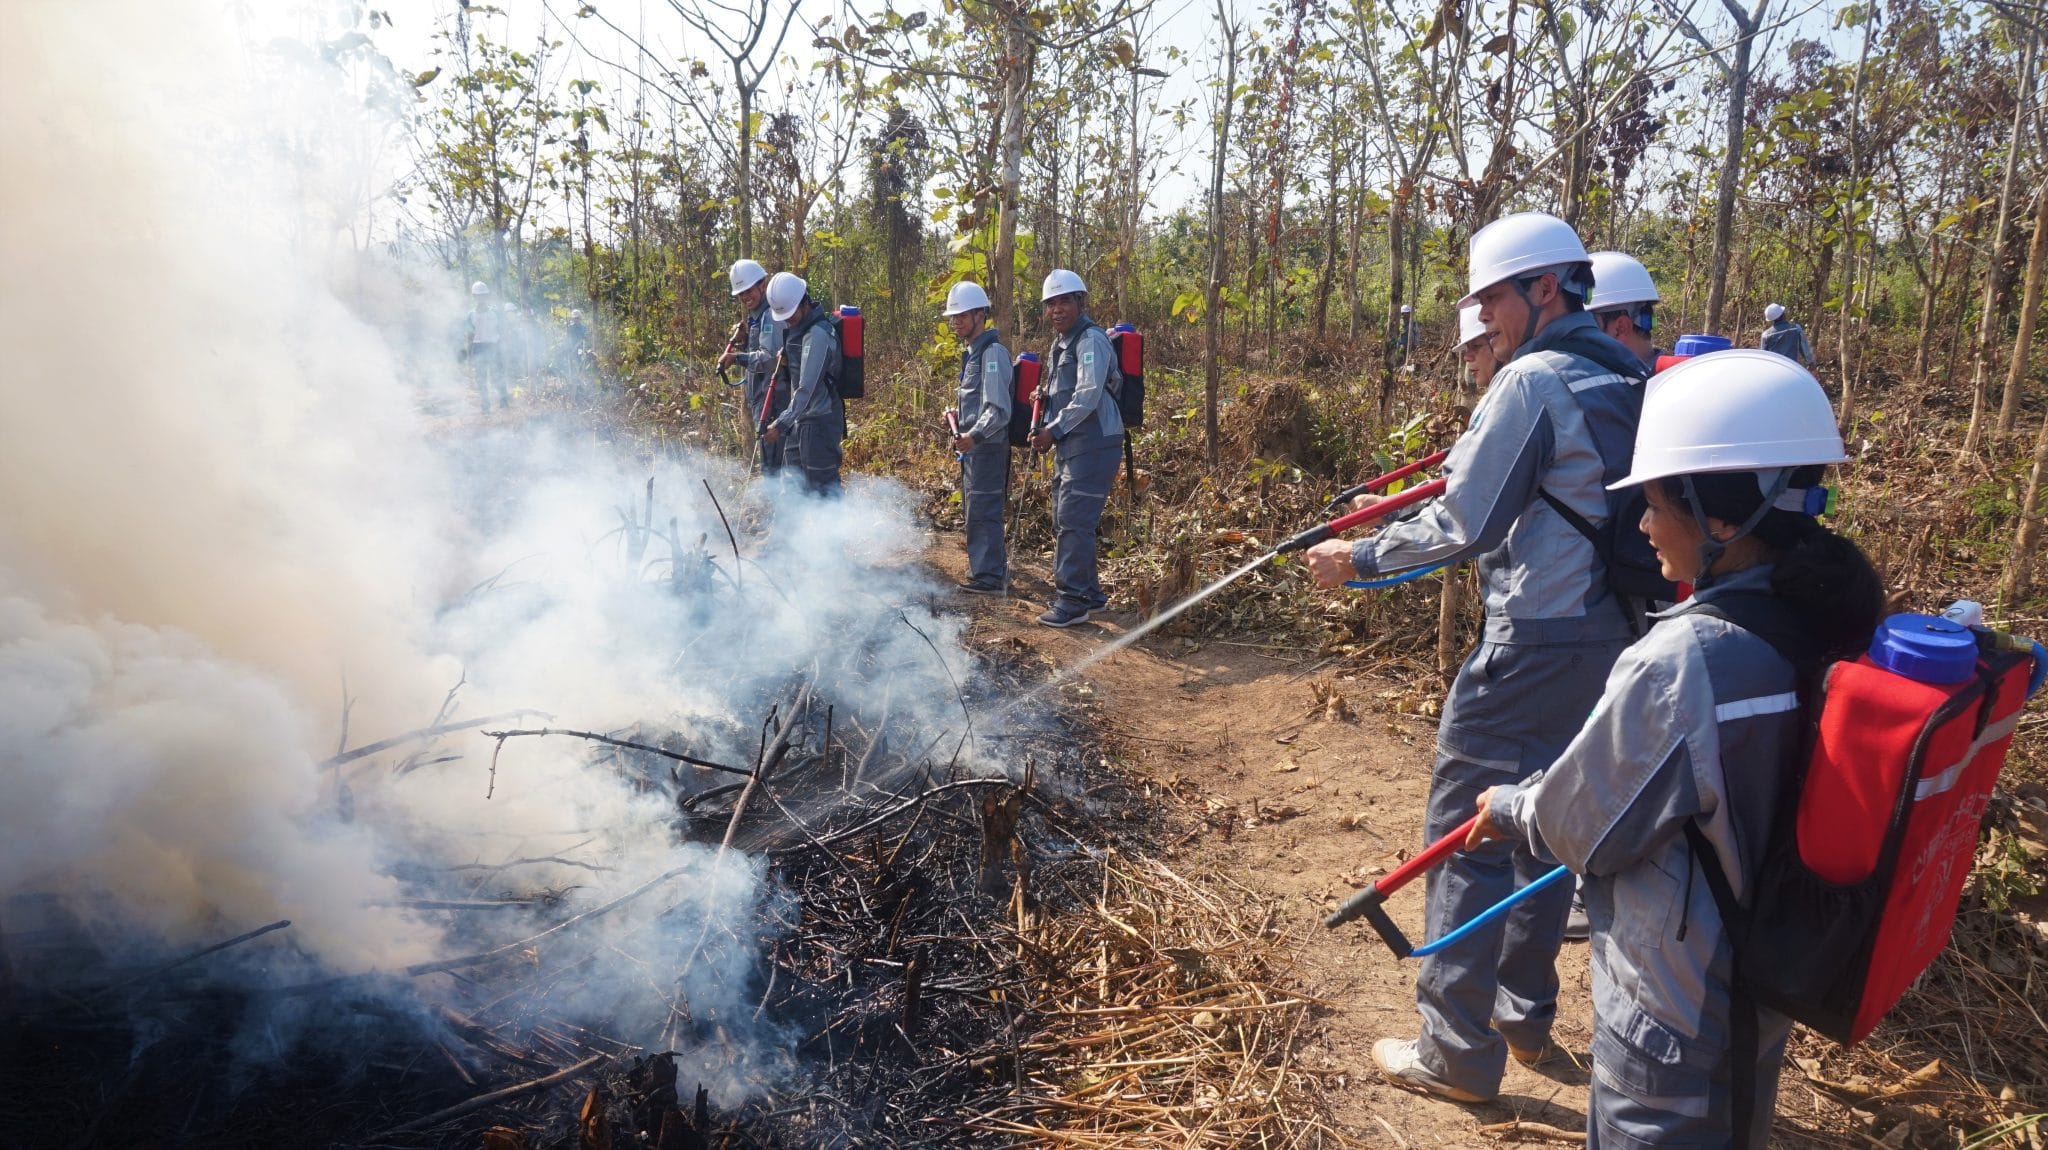 Building capacities in CommunityBased Forest Fire Management AFoCO